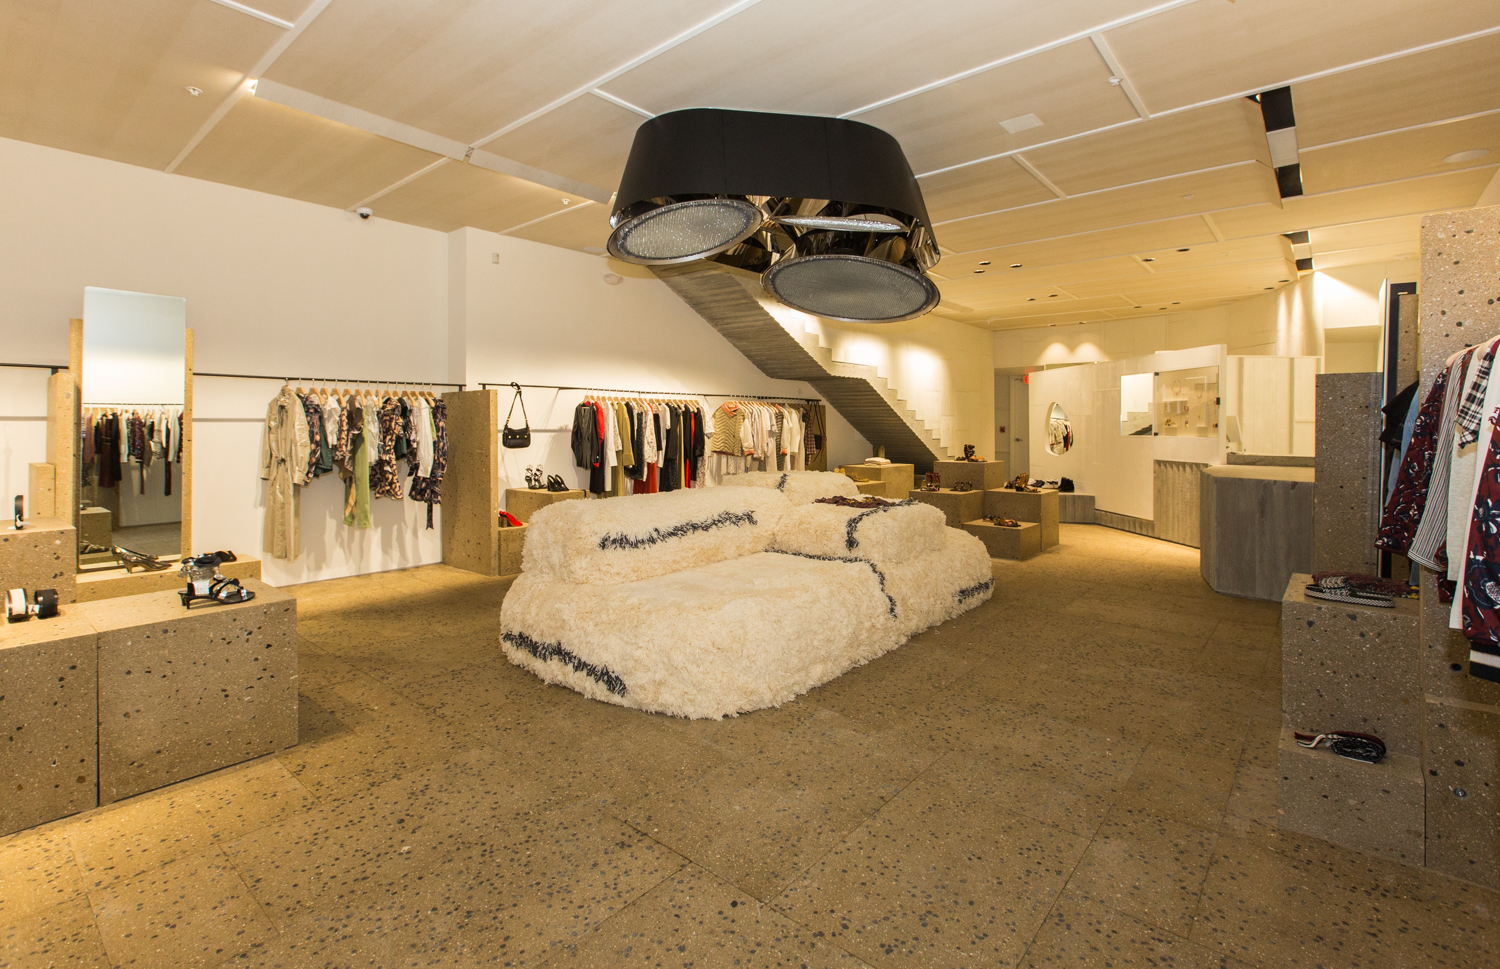 Billedhugger smid væk Guggenheim Museum Isabel Marant Unveils New Miami Boutique - Daily Front Row